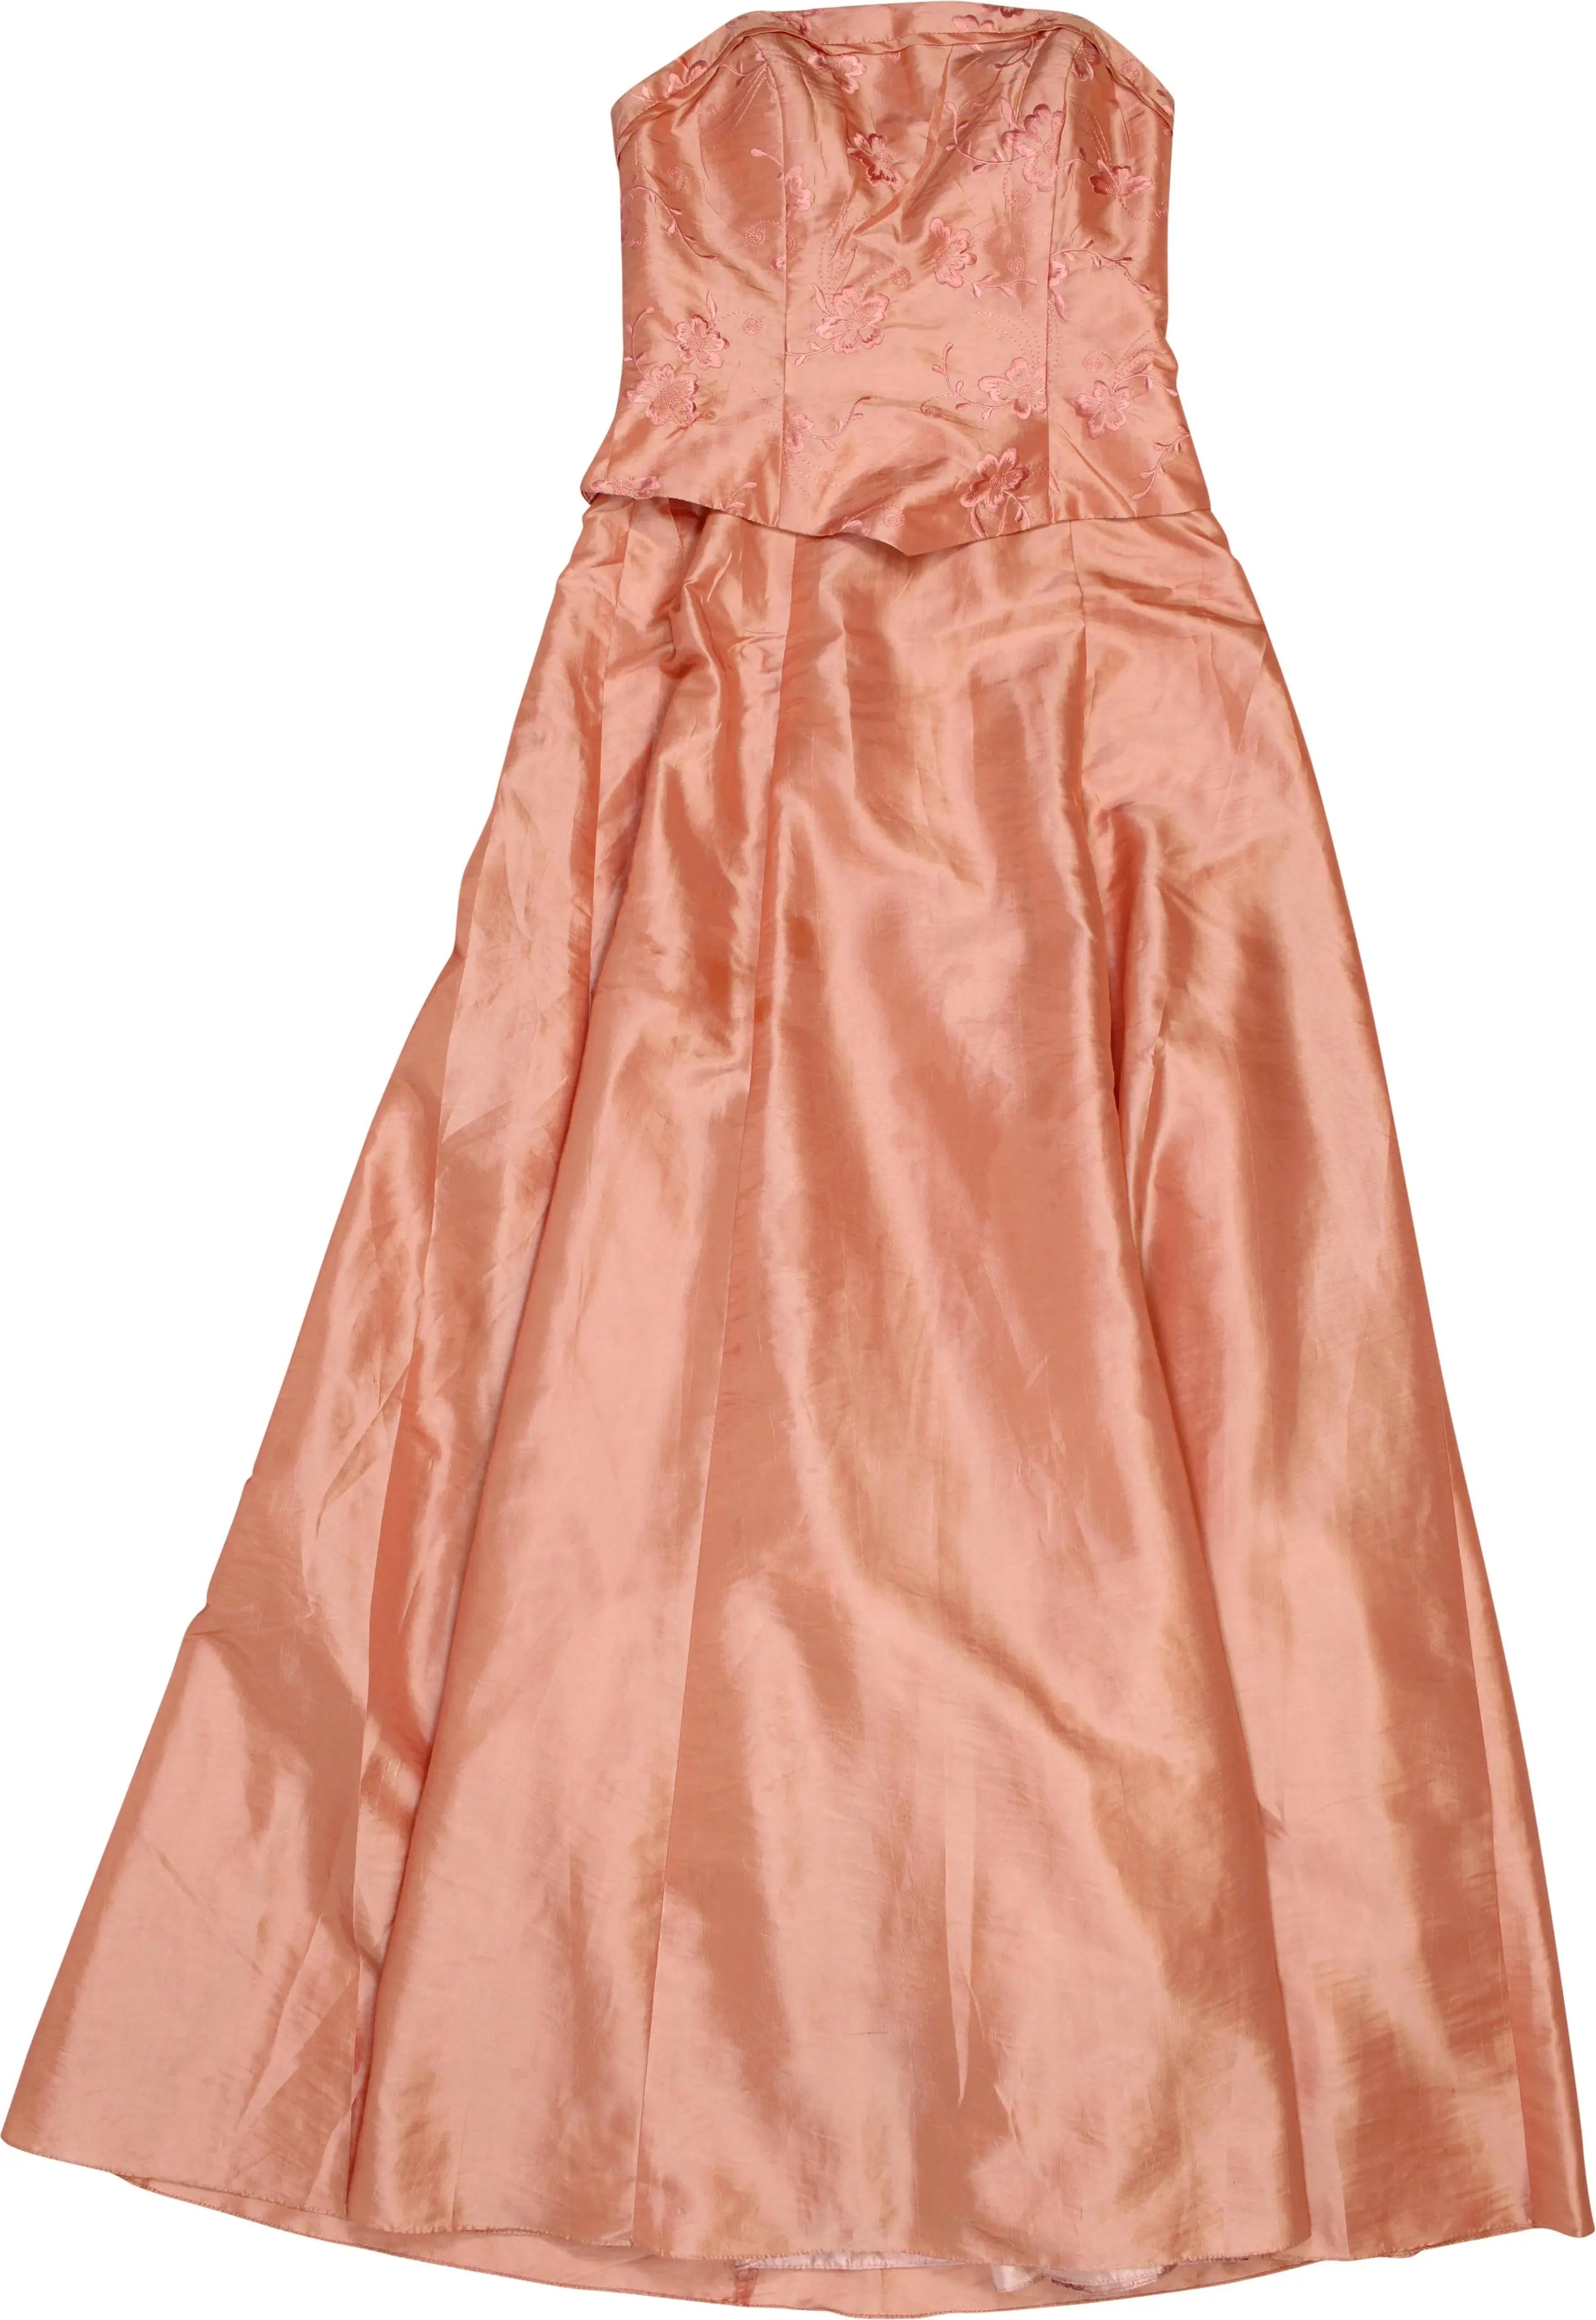 Unknown - Satin Evening Dress- ThriftTale.com - Vintage and second handclothing